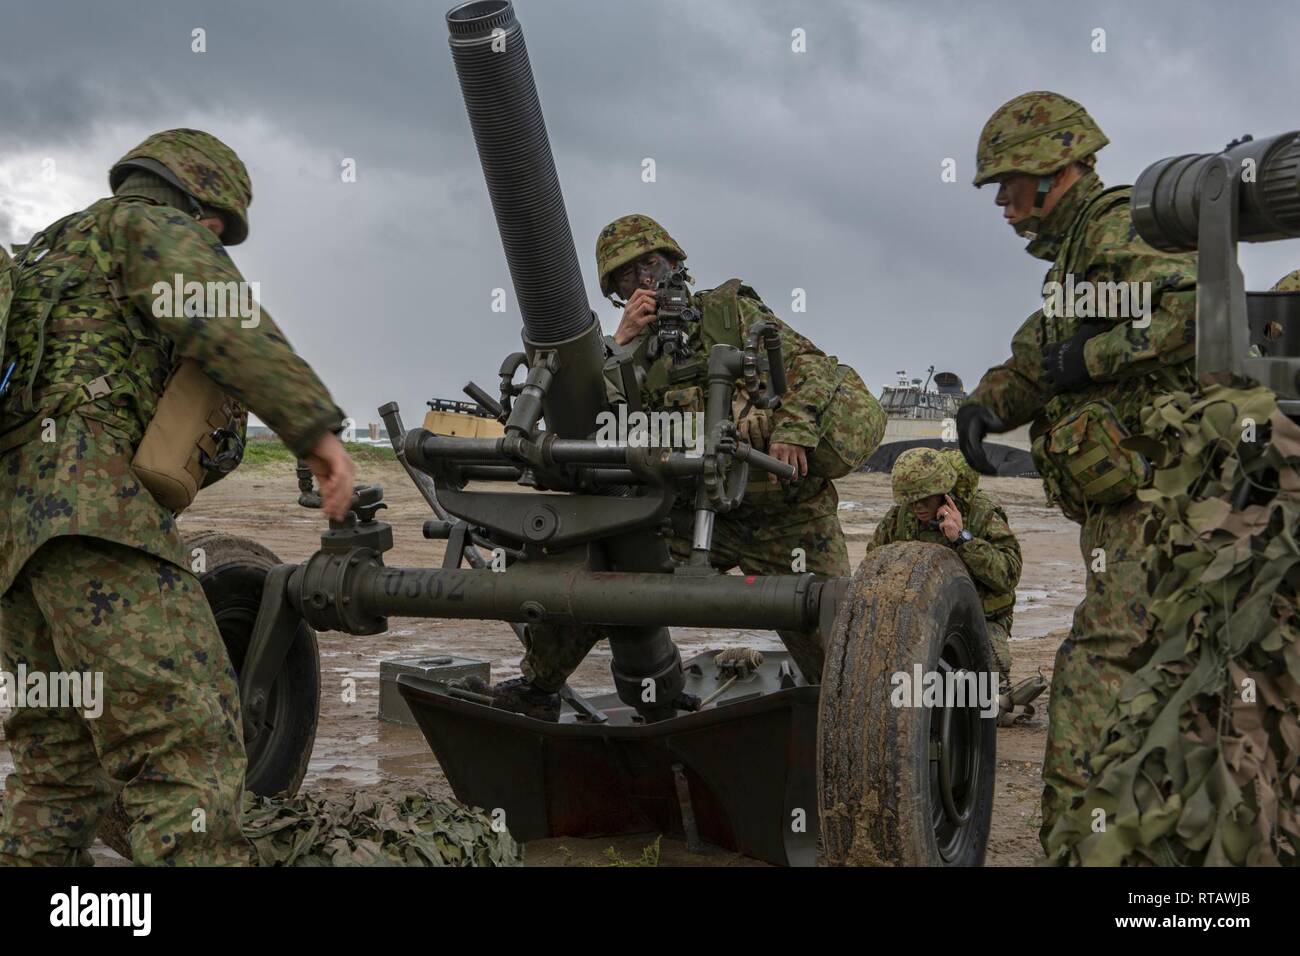 Japan Ground Self-Defense Force (JGSDF) Soldiers execute a simulated call to fire using a 120mm mortar for an amphibious landing exercise during Iron Fist 2019, Feb. 4, on U.S. Marine Corps Base Camp Pendleton, CA. Exercise Iron Fist is an annual, multilateral training exercise where U.S. and Japanese service members train together and share techniques, tactics and procedures to improve their combined operational capabilities. Stock Photo